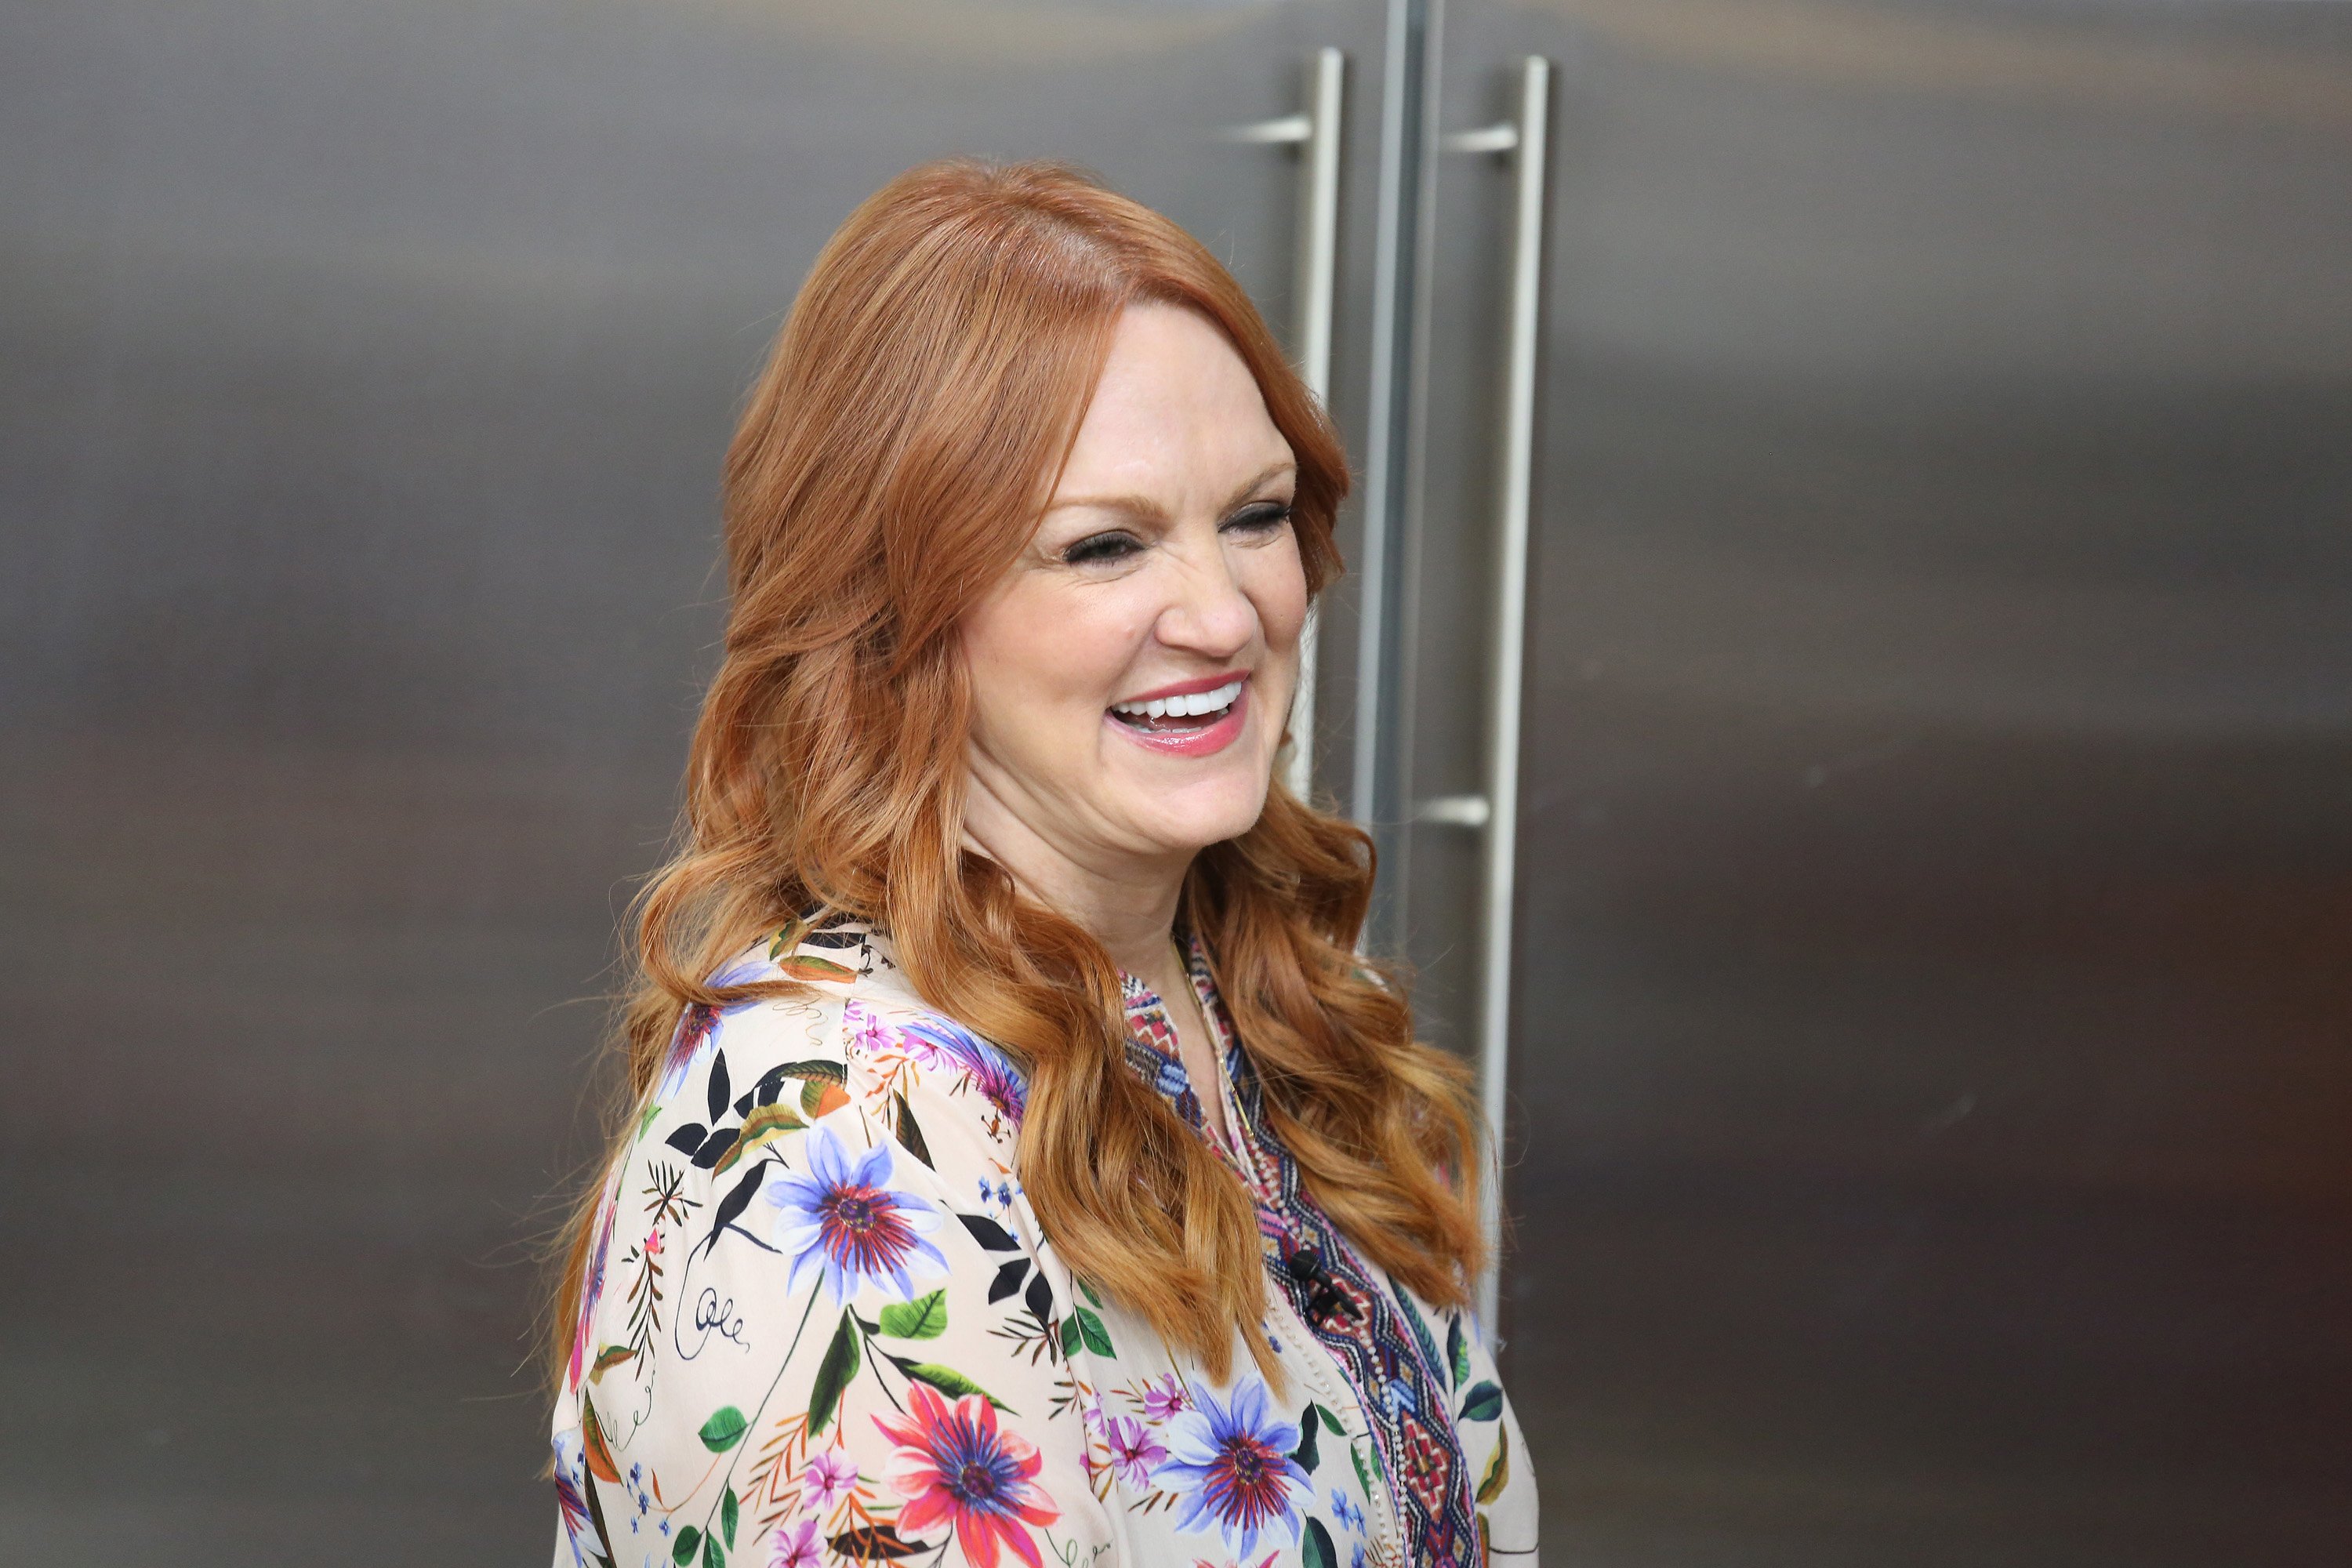 Ree Drummond wears a long-sleeved, patterned blouse in this photograph.